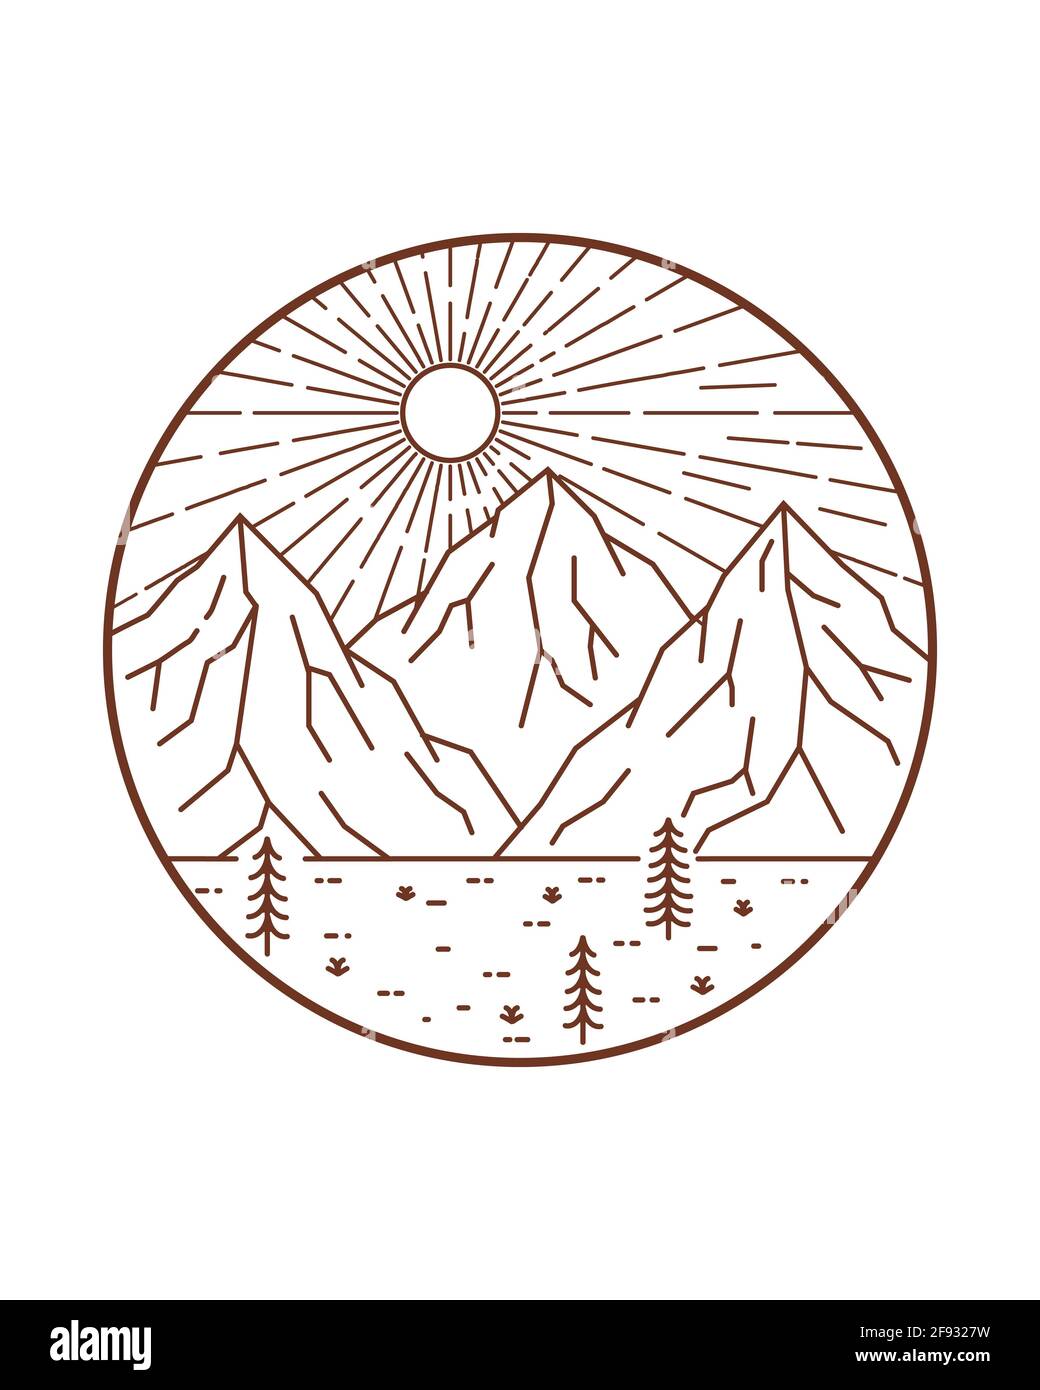 Mountain Drawing | Simple and Inspiring Art Sketch